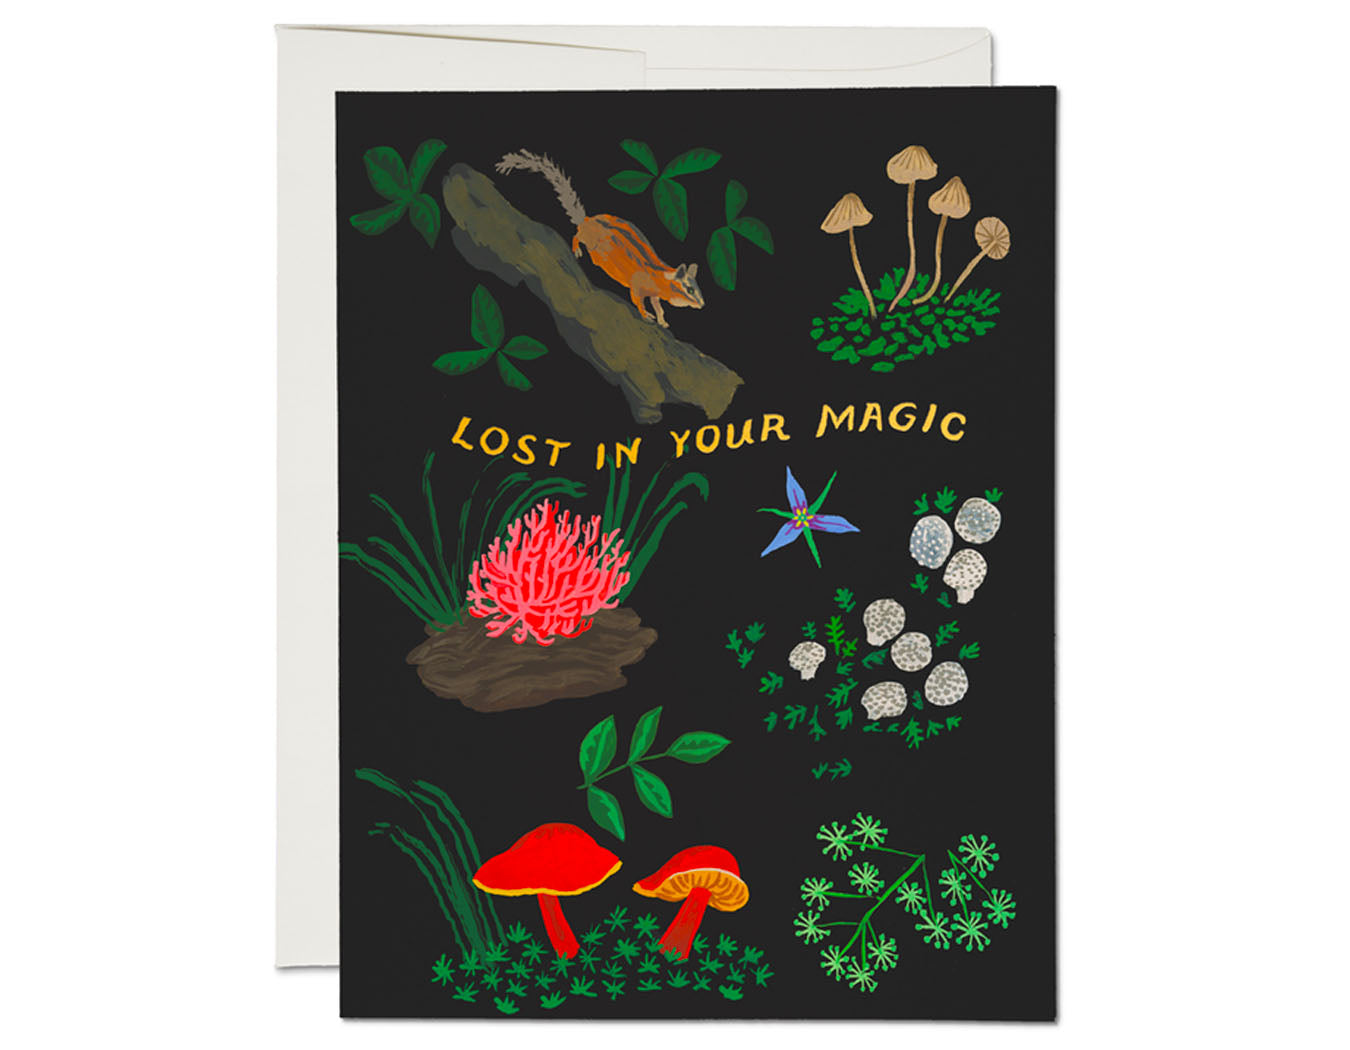 black background woodlood creatures and mushrooms flora and fauna text reads lost in your magic 